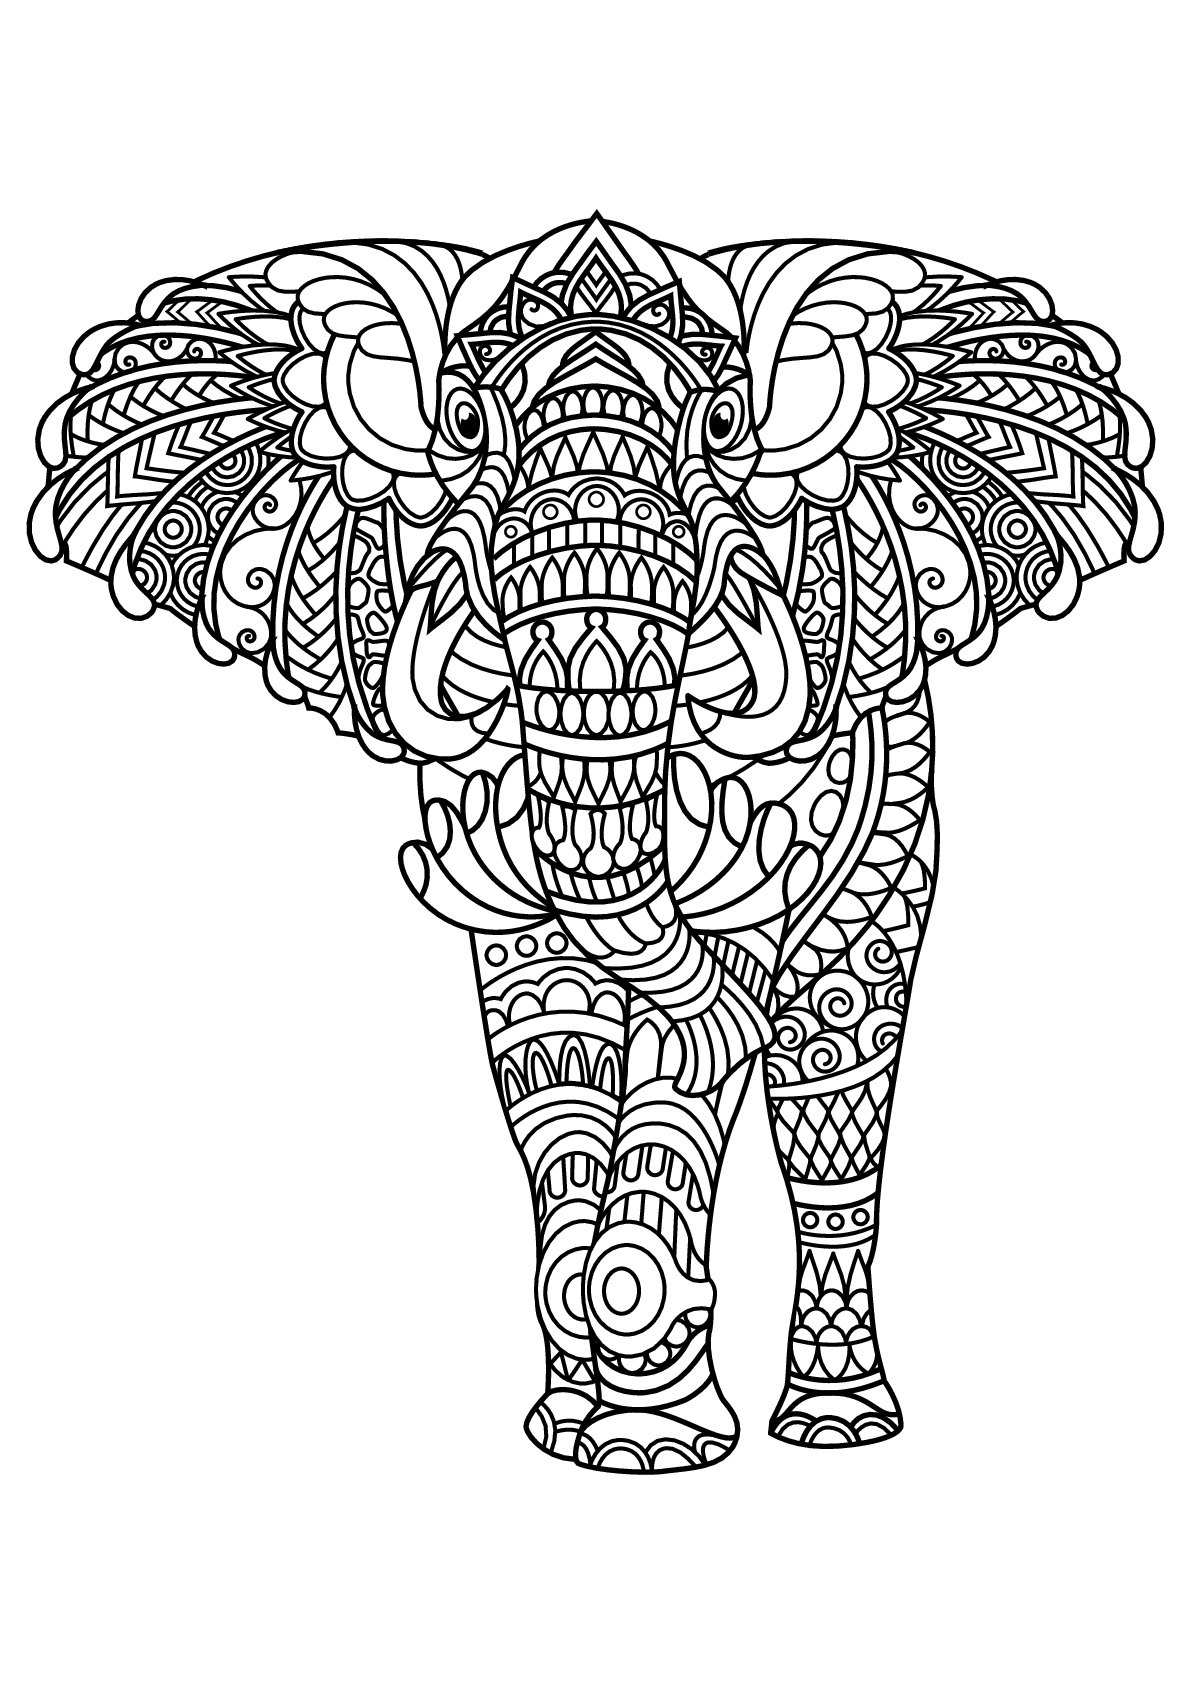 Download Free book elephant - Elephants Adult Coloring Pages